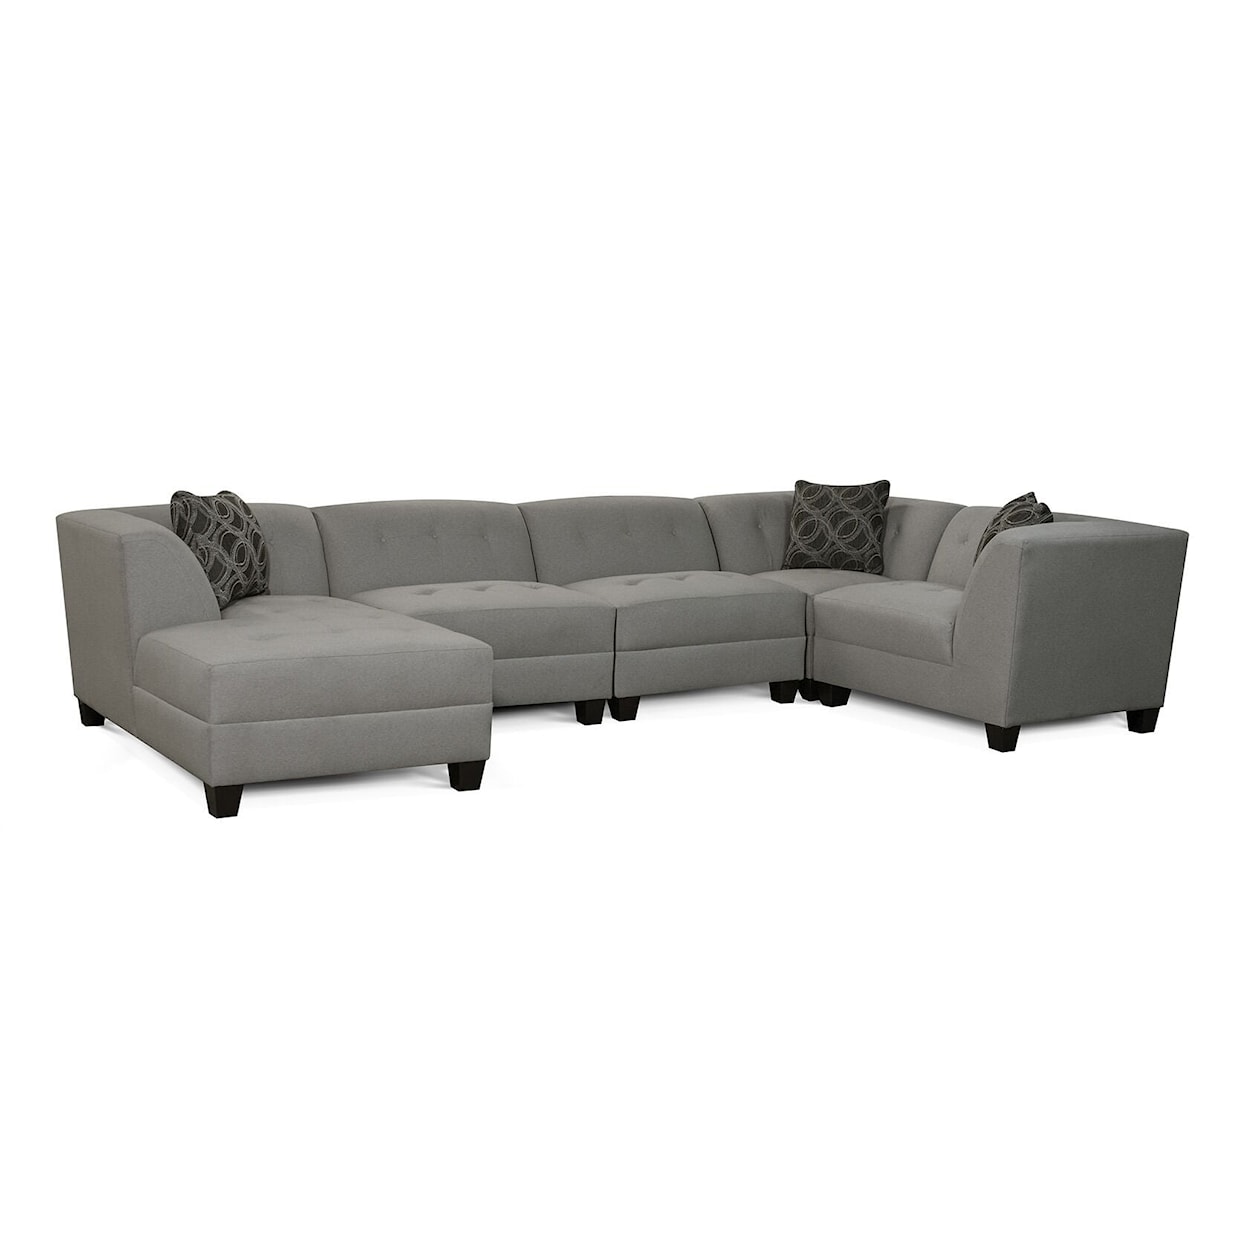 Dimensions 4M00 Series Sectional Sofa